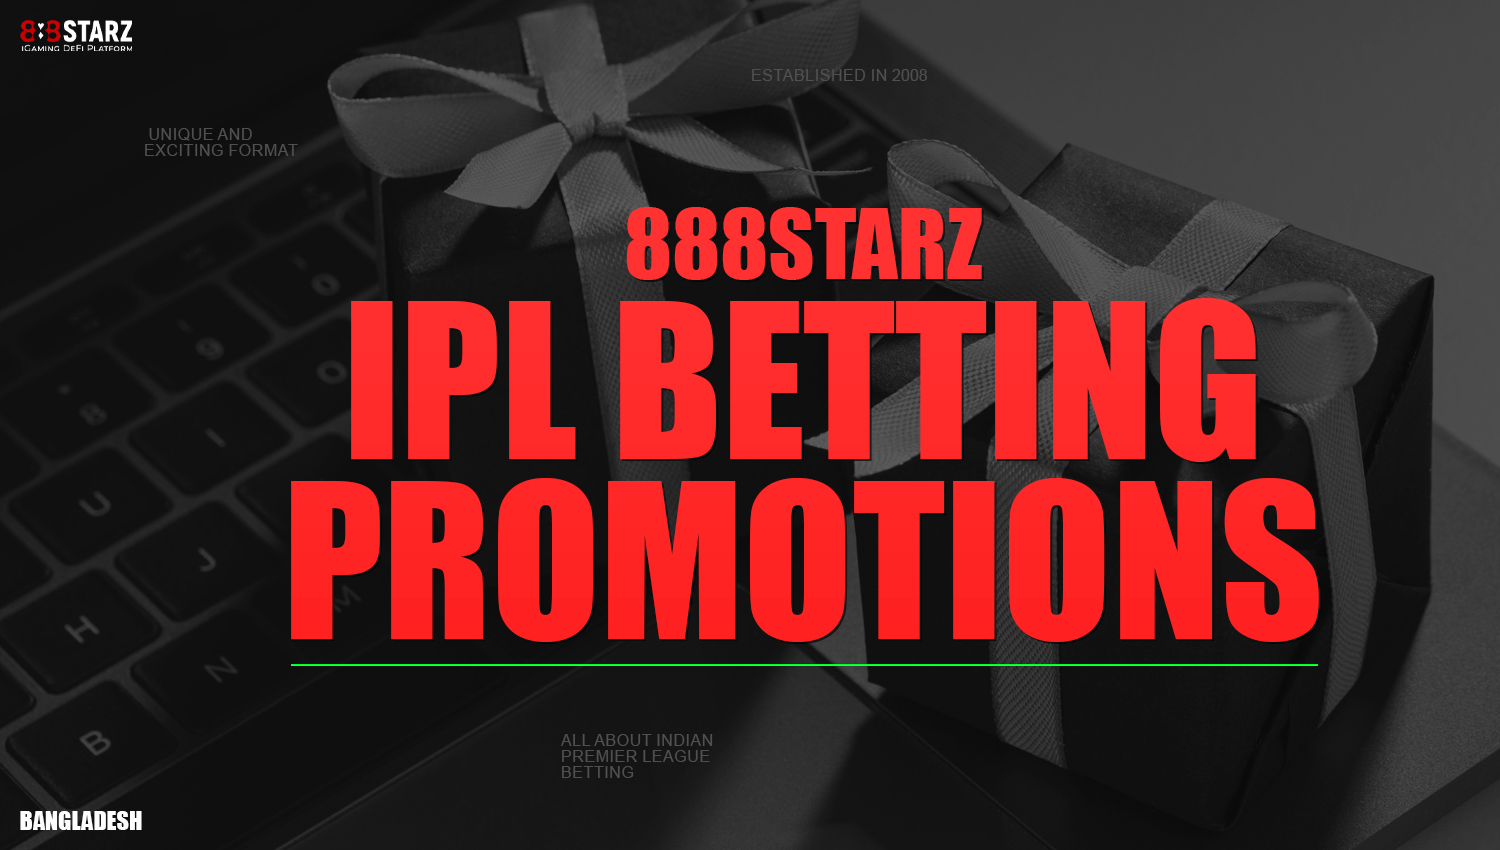 Promotions and bonuses from 888starz for IPL betting fans